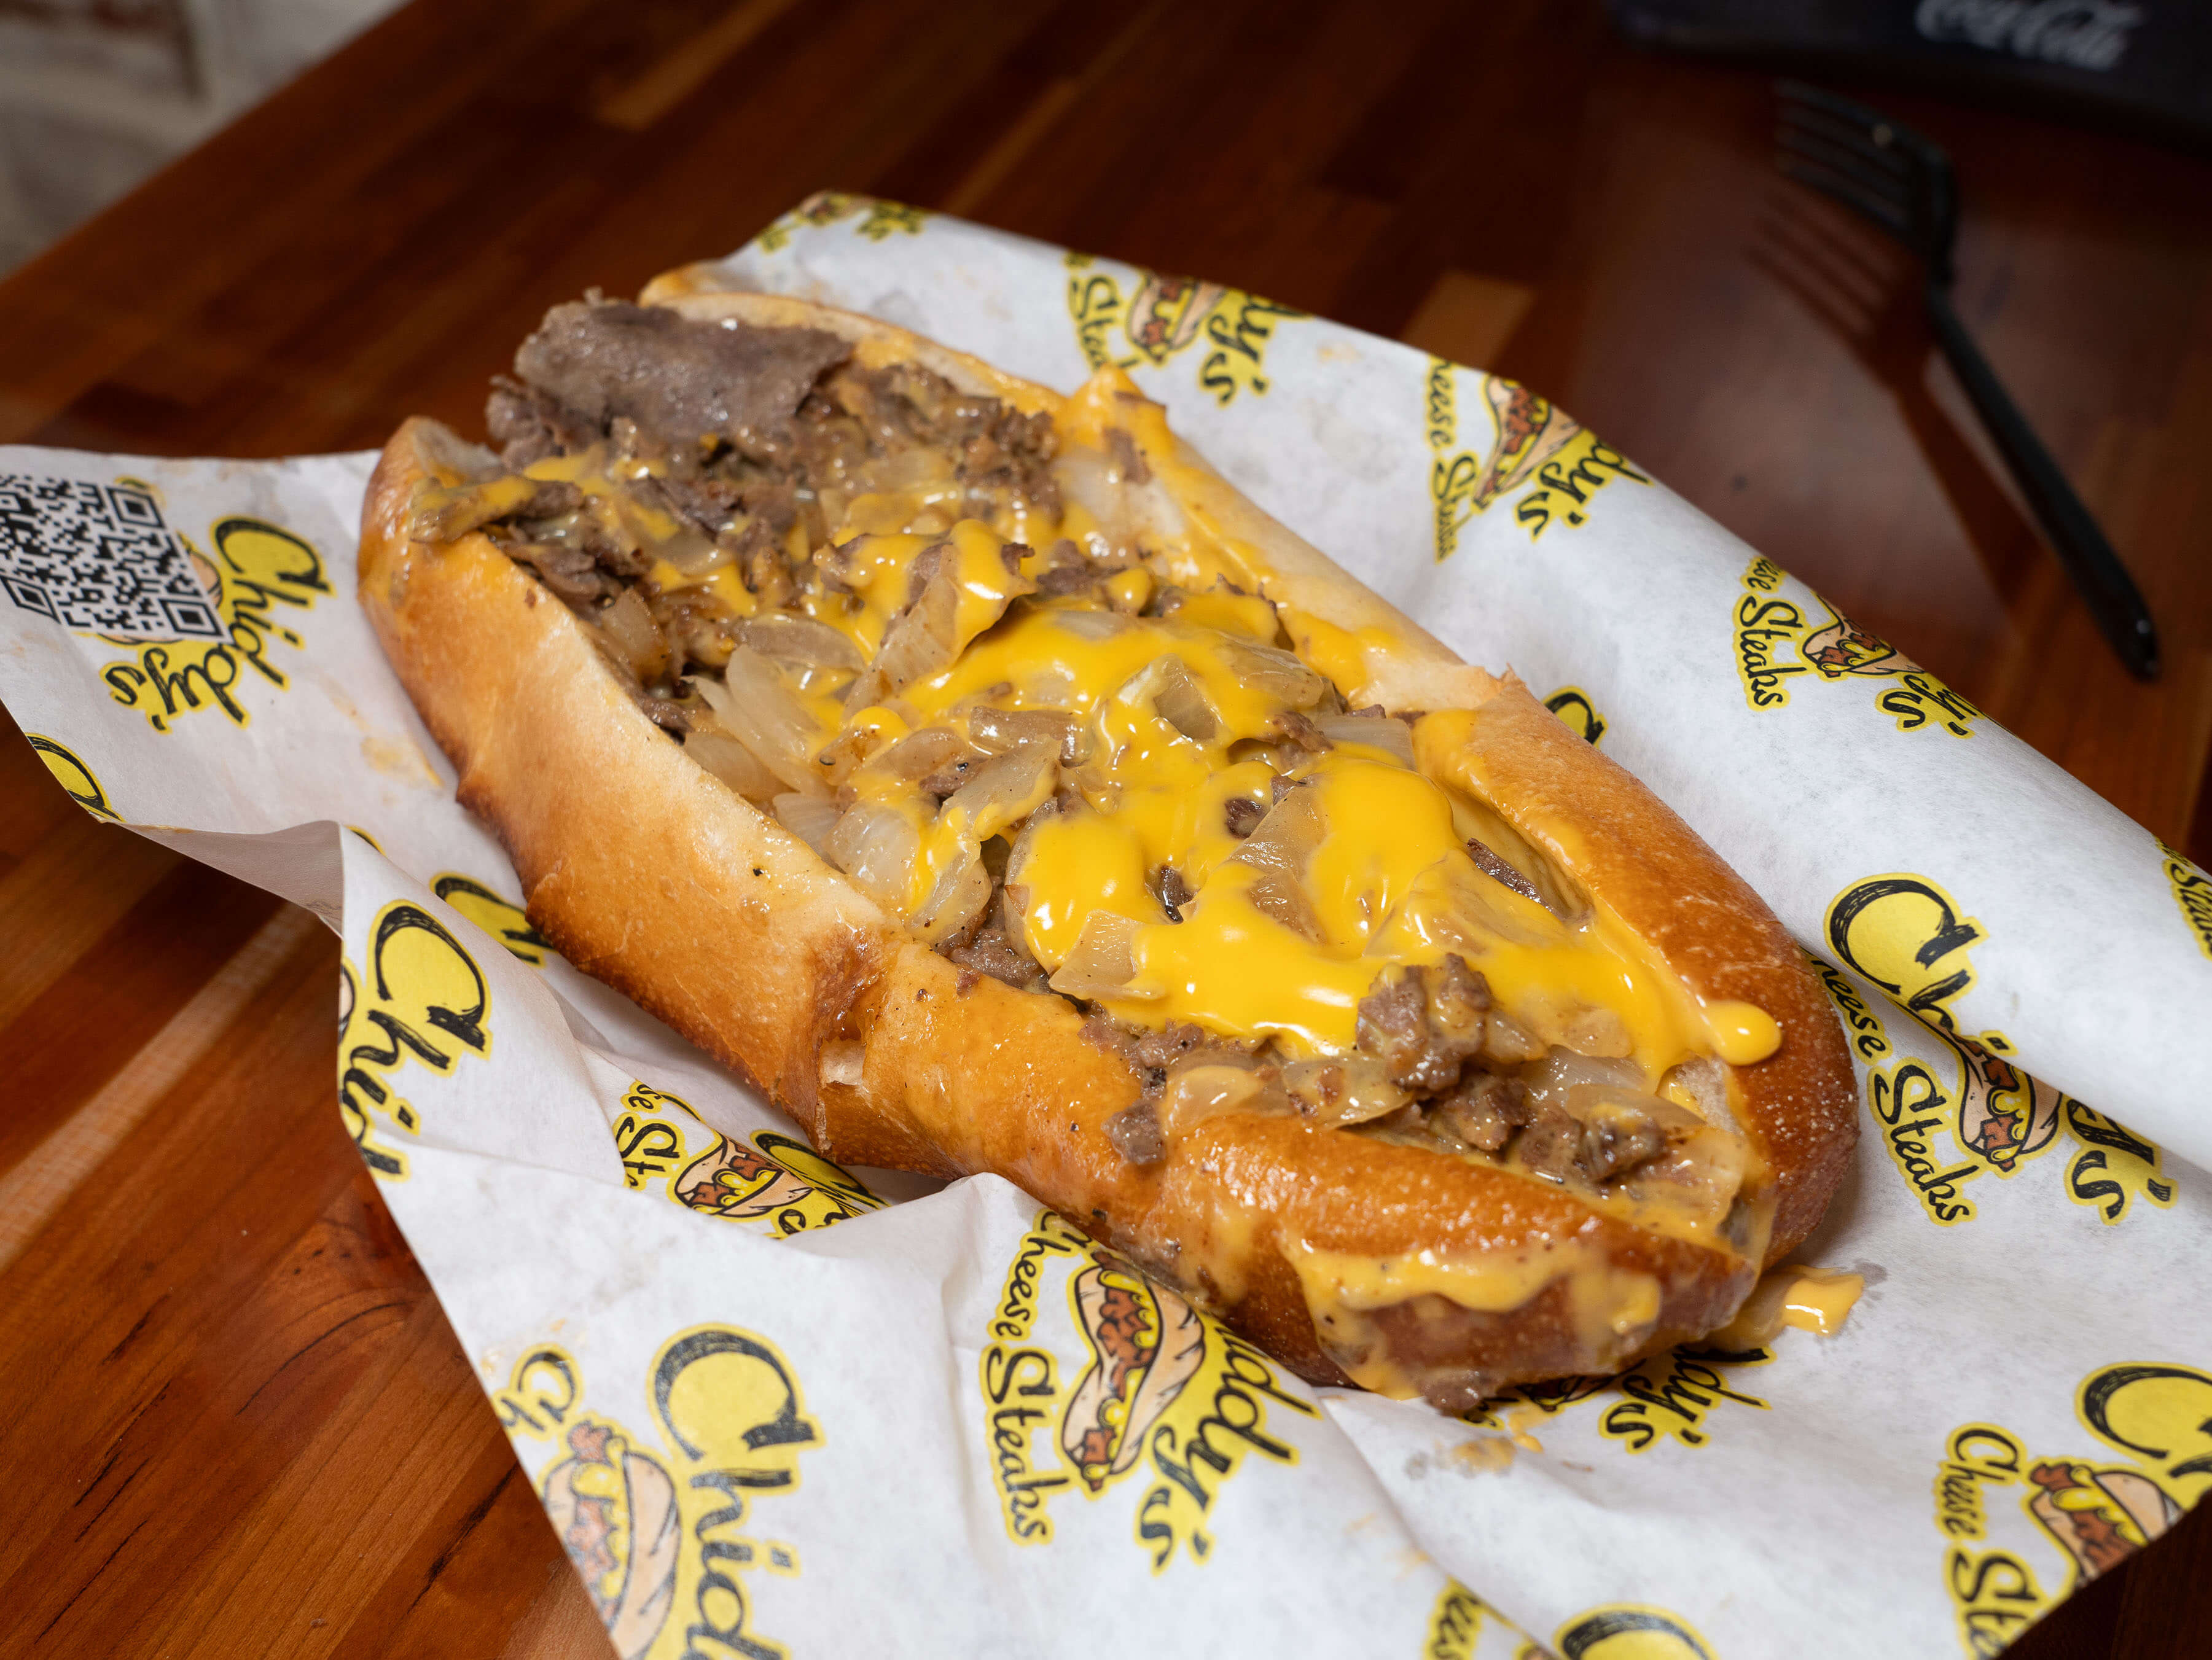 Wrapped in Chiddy's Cheesesteak wrapping paper, a cheesesteak on a toasted long roll is topped with fried onions and Cheese Wiz.  